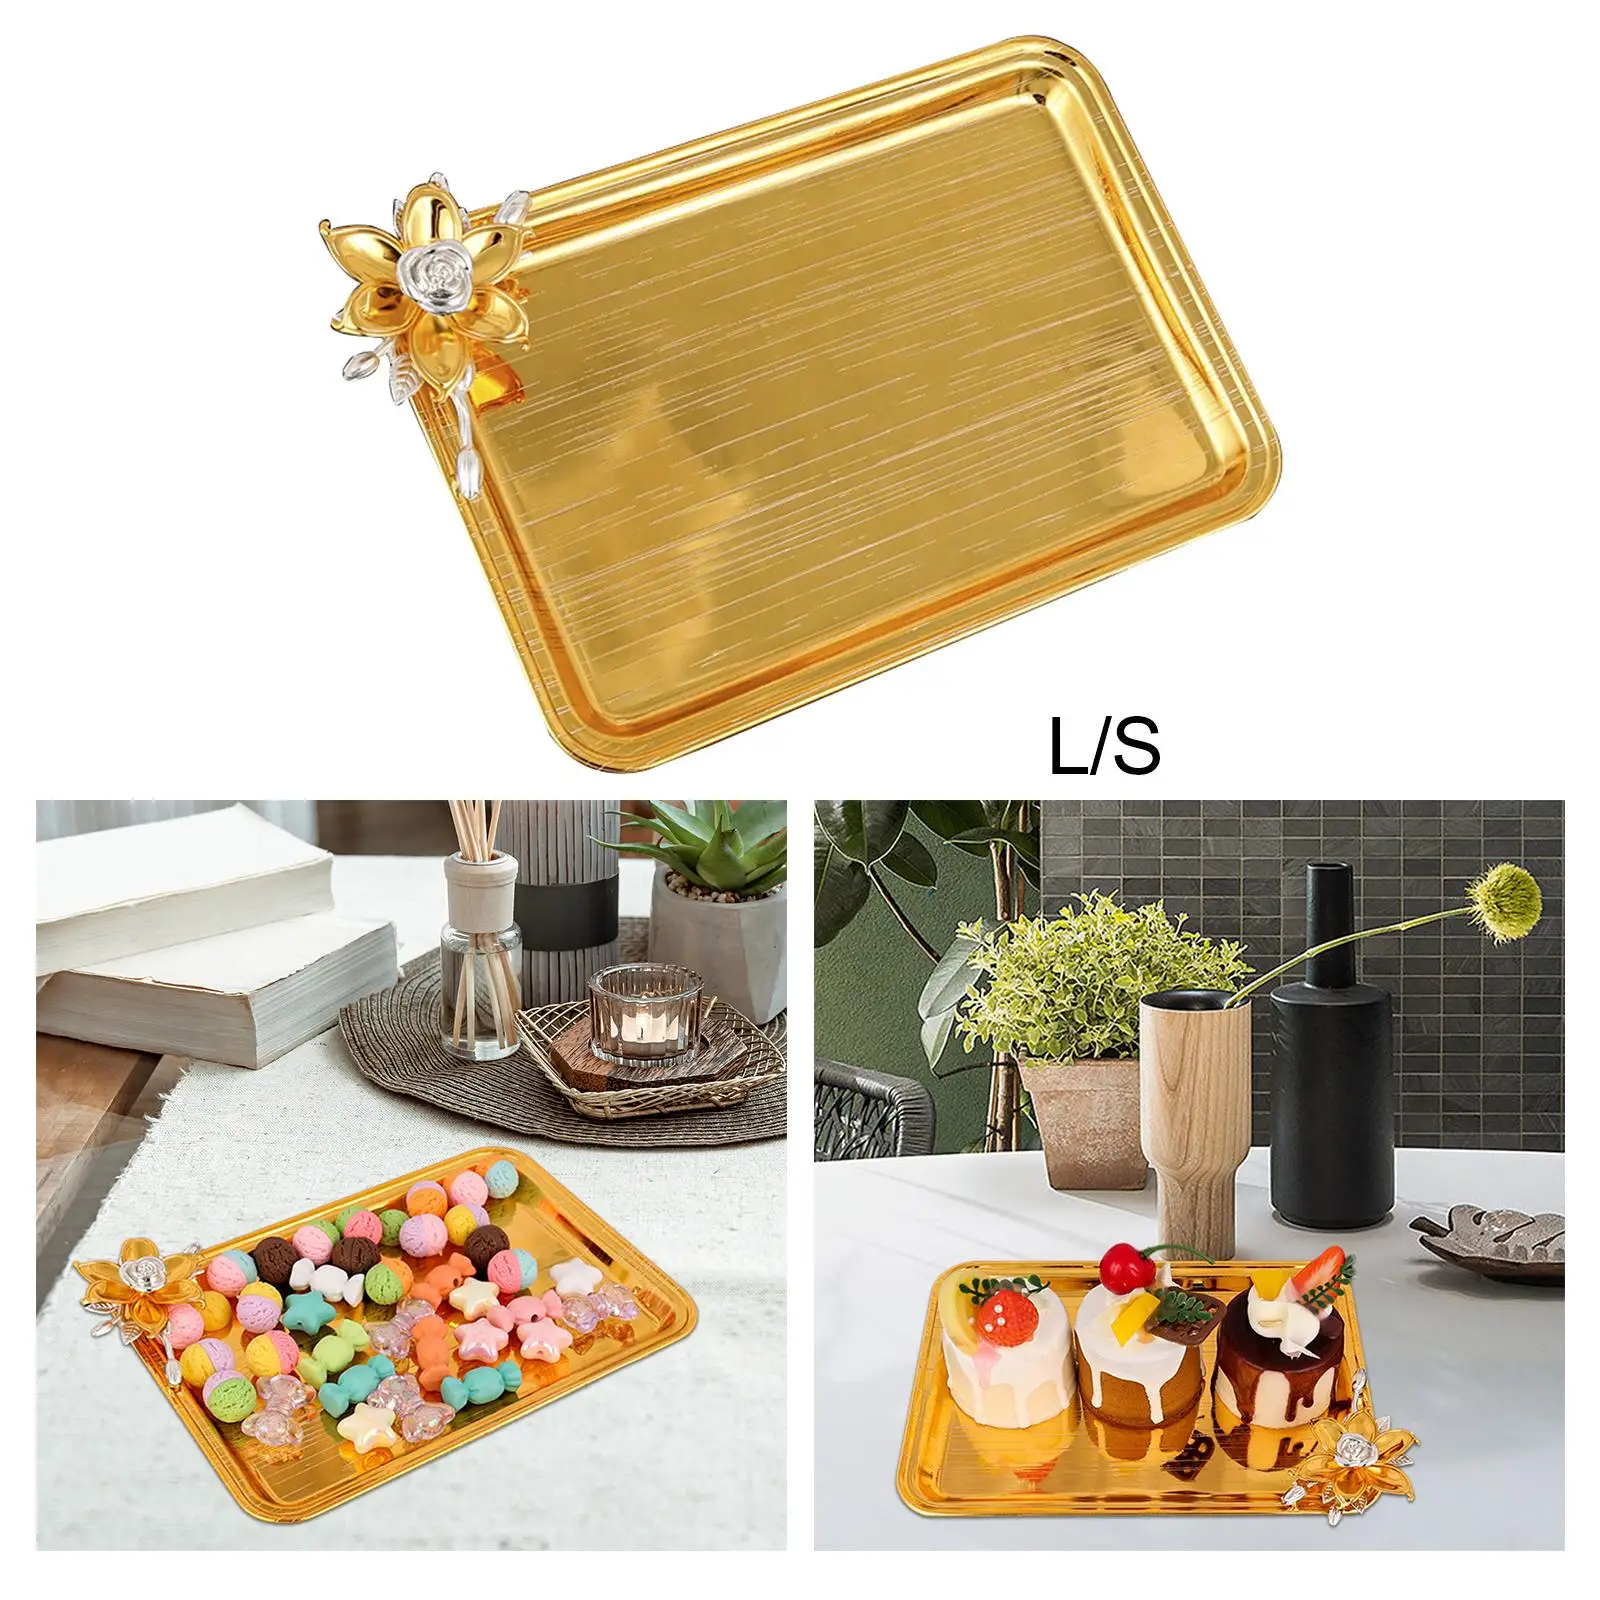 Decorative Tray Versatile Lightweight Durable Platter Sundries Display Plate Pastry Plate for Party Dinner Bar Desk Dining Room